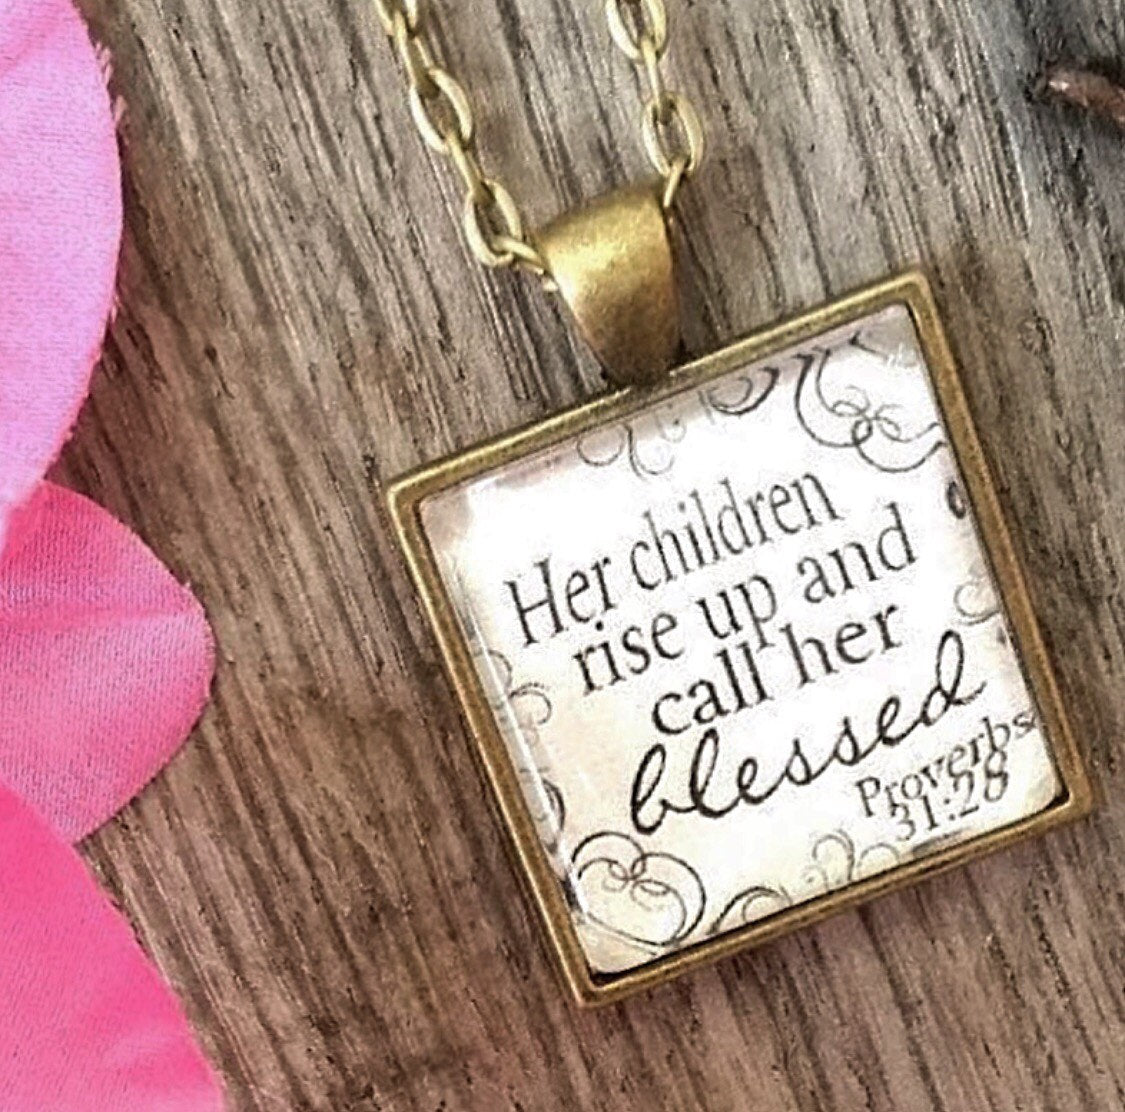 Her children rise up and call her blessed. Proverbs 31:28 Necklace - Redeemed Jewelry